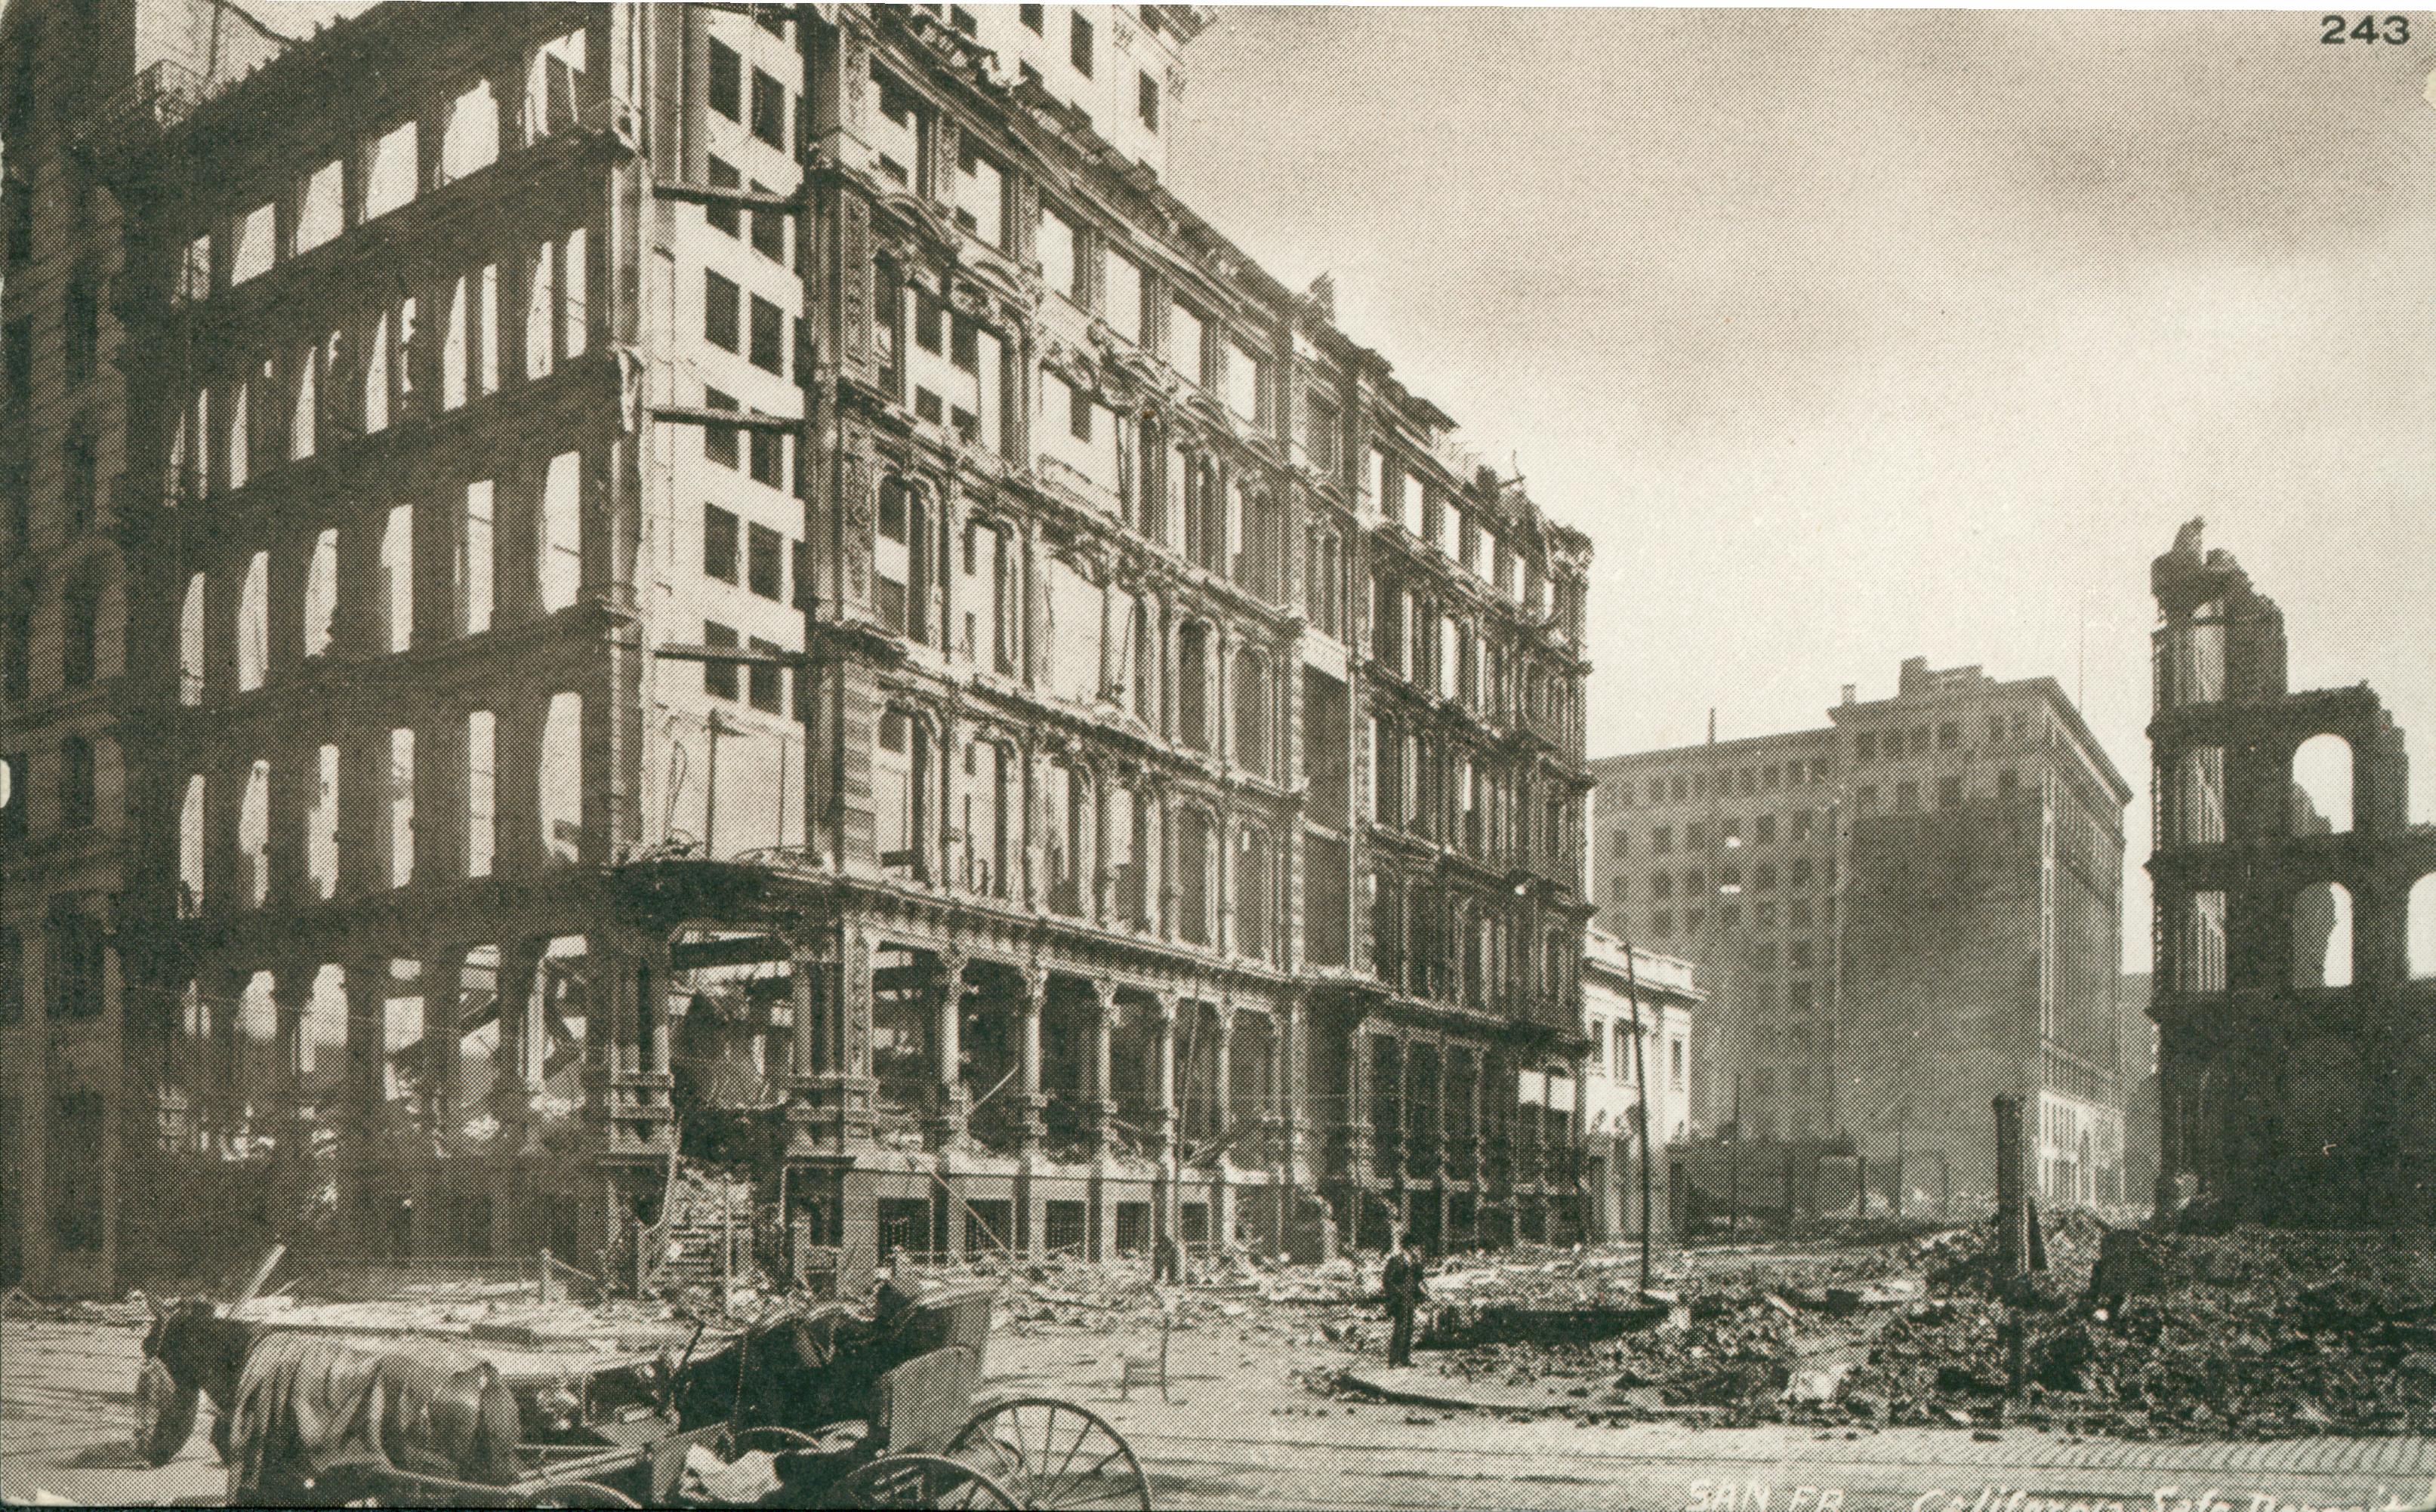 Shows the destruction of multiple buildings in San Francisco.